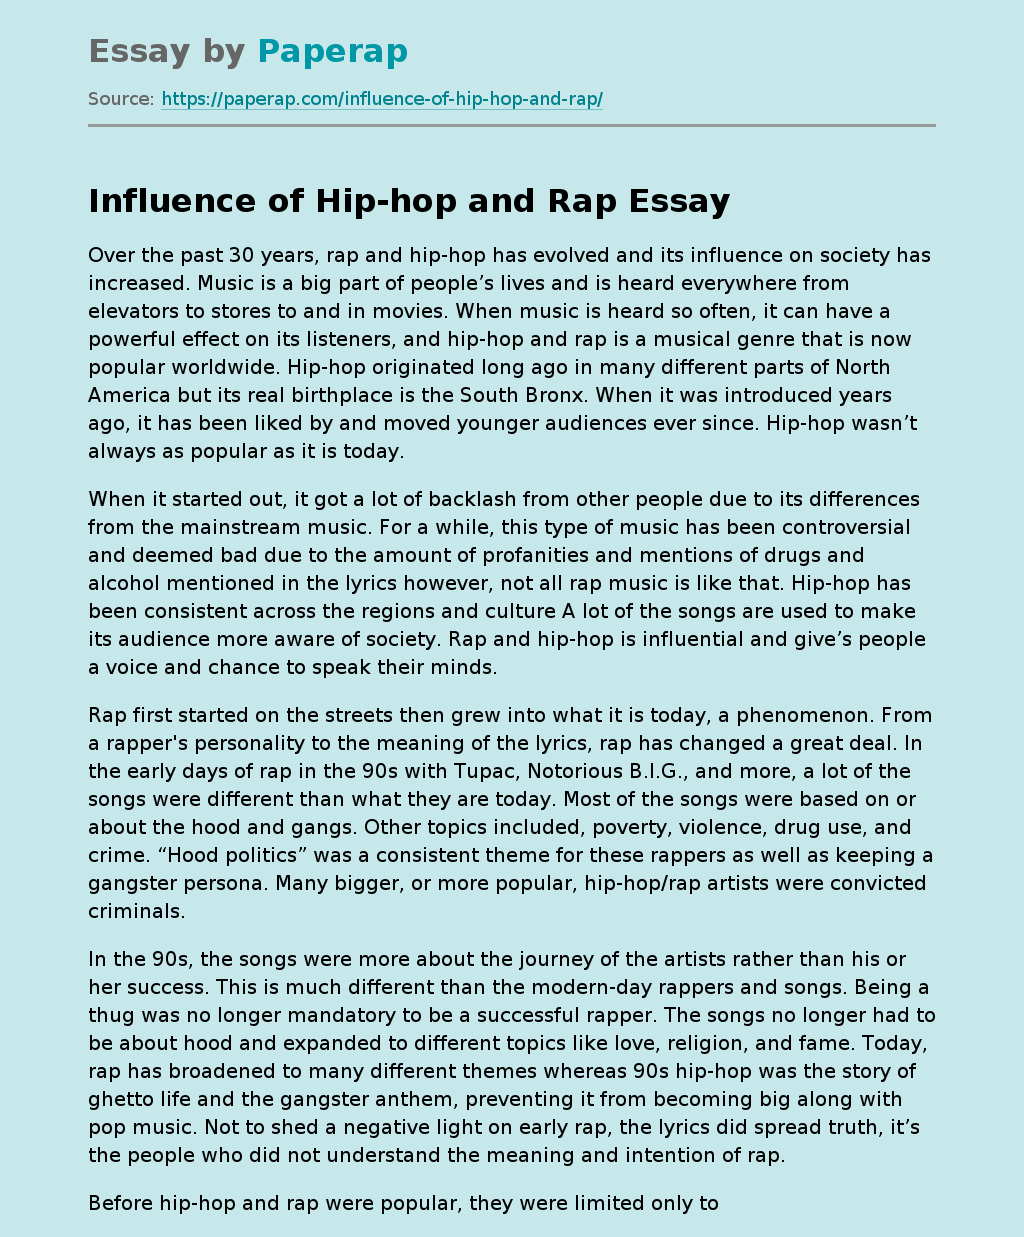 Influence of Hip-hop and Rap